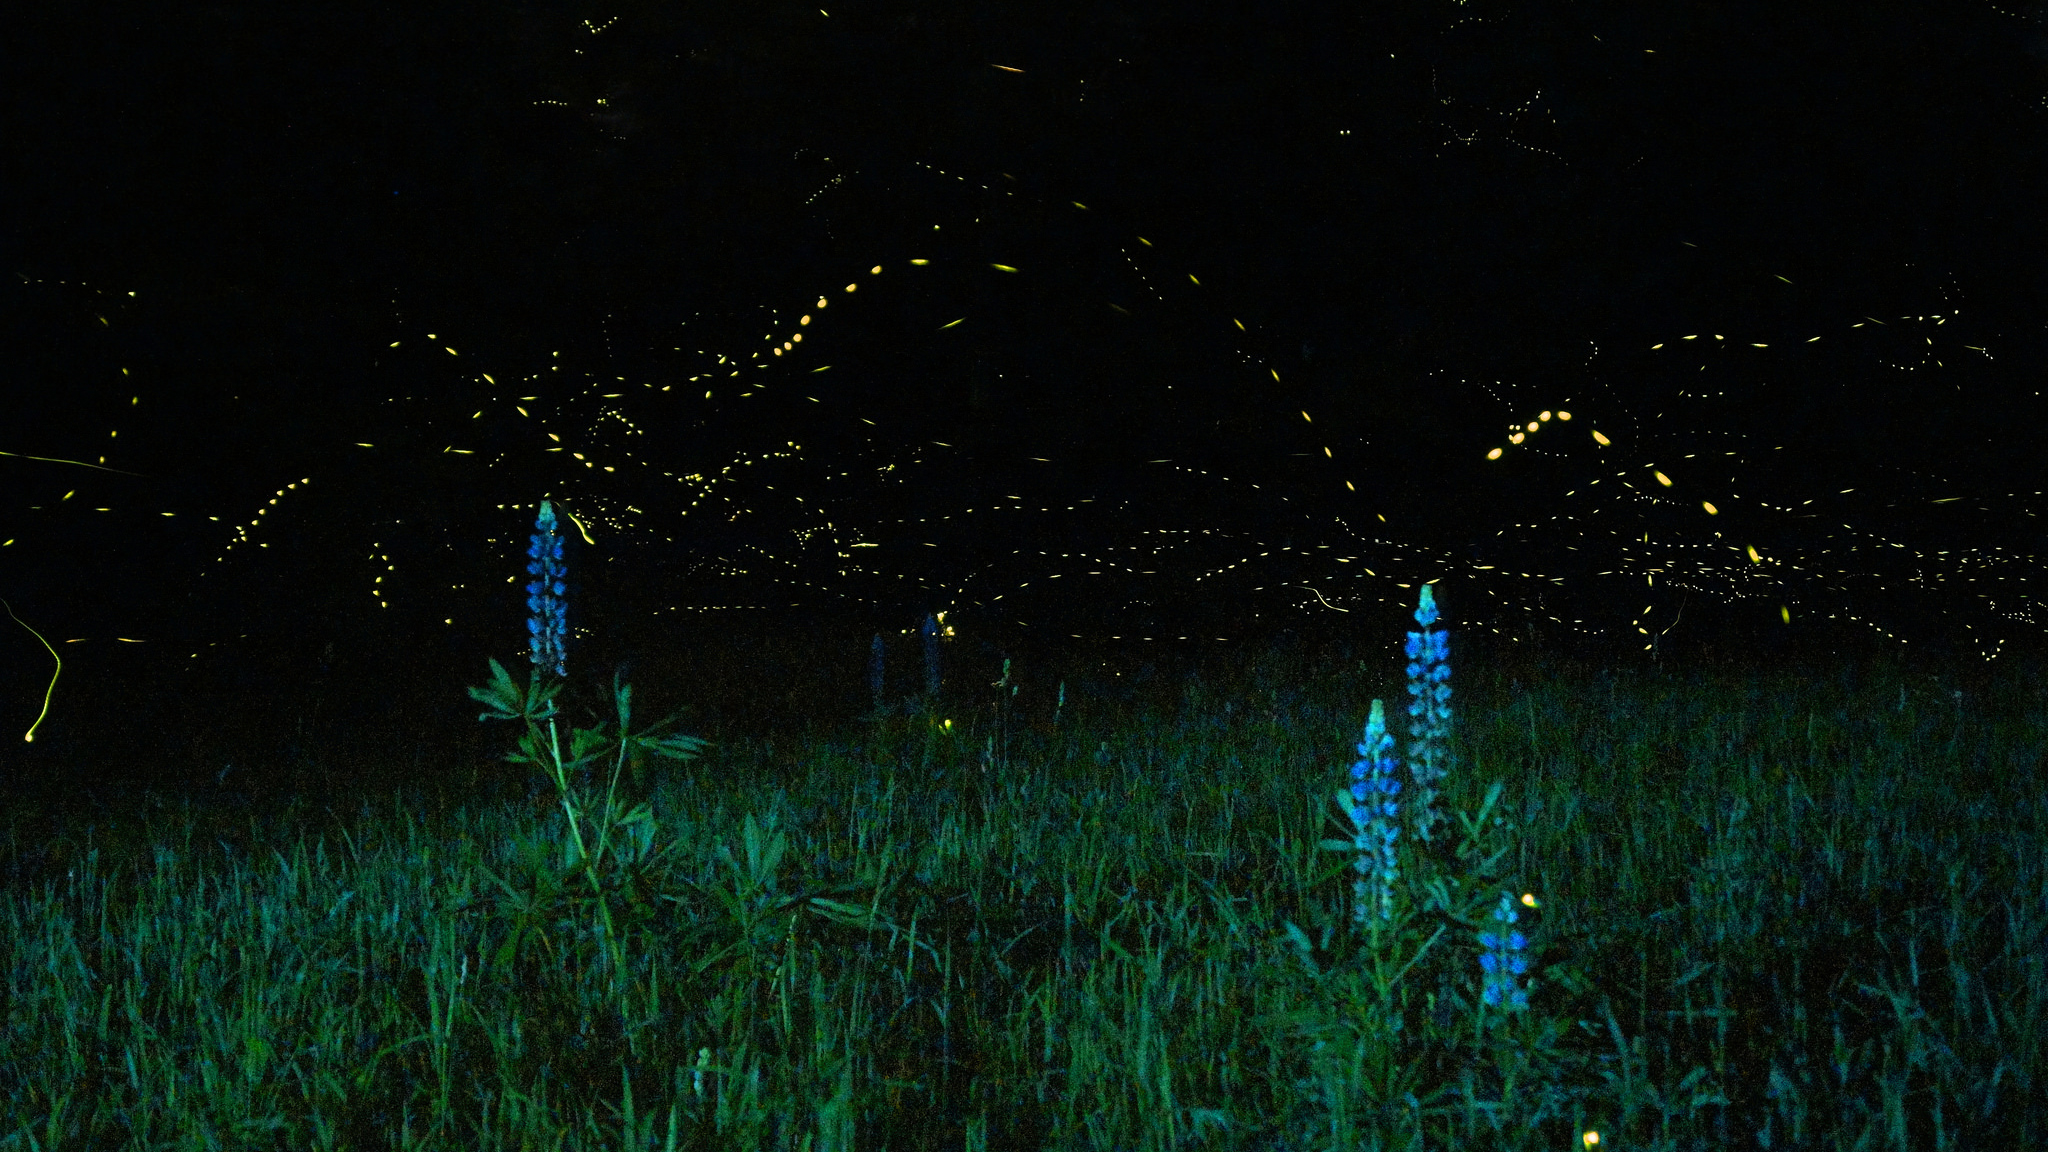 Lupines and fireflies. Photo © Mike Lewinski / Flickr through a Creative Commons license